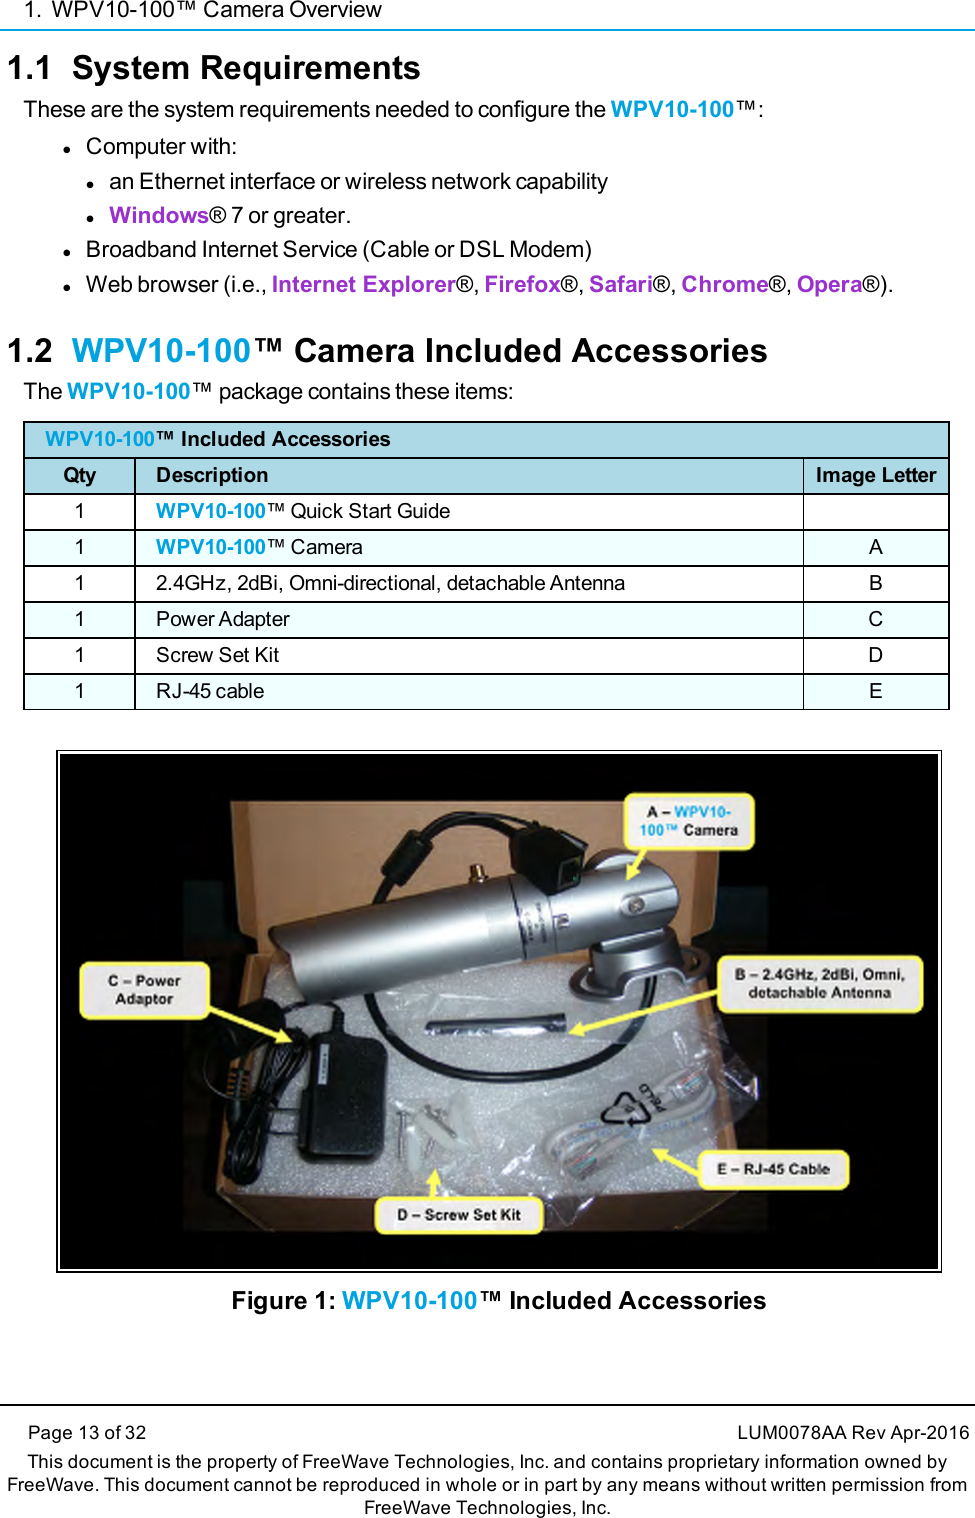 1. WPV10-100™ Camera OverviewPage 13 of 32 LUM0078AA Rev Apr-2016This document is the property of FreeWave Technologies, Inc. and contains proprietary information owned byFreeWave. This document cannot be reproduced in whole or in part by any means without written permission fromFreeWave Technologies, Inc.1.1 System RequirementsThese are the system requirements needed to configure the WPV10-100™:lComputer with:lan Ethernet interface or wireless network capabilitylWindows® 7 or greater.lBroadband Internet Service (Cable or DSL Modem)lWeb browser (i.e., Internet Explorer®, Firefox®, Safari®, Chrome®, Opera®).1.2 WPV10-100™ Camera Included AccessoriesThe WPV10-100™ package contains these items:WPV10-100™ Included AccessoriesQty Description Image Letter1WPV10-100™ Quick Start Guide1WPV10-100™ Camera A1 2.4GHz, 2dBi, Omni-directional, detachable Antenna B1 Power Adapter C1 Screw Set Kit D1 RJ-45 cable EFigure 1: WPV10-100™ Included Accessories